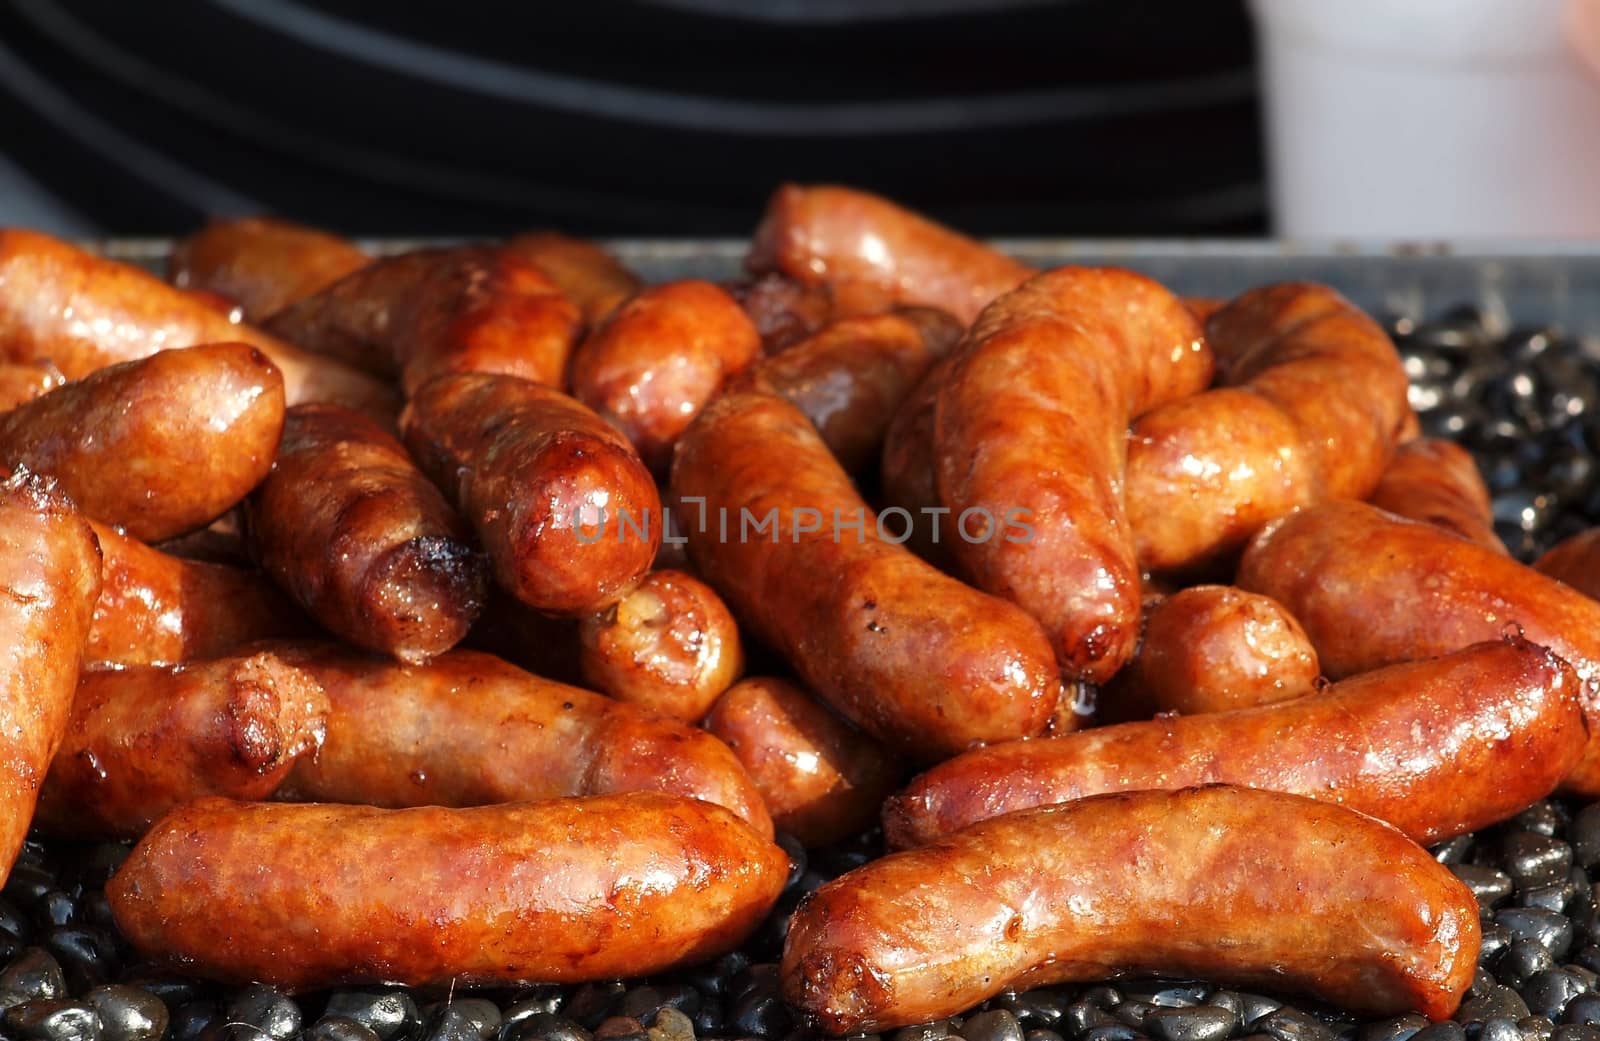 Barbecued sausages are on sale at an outdoor stall